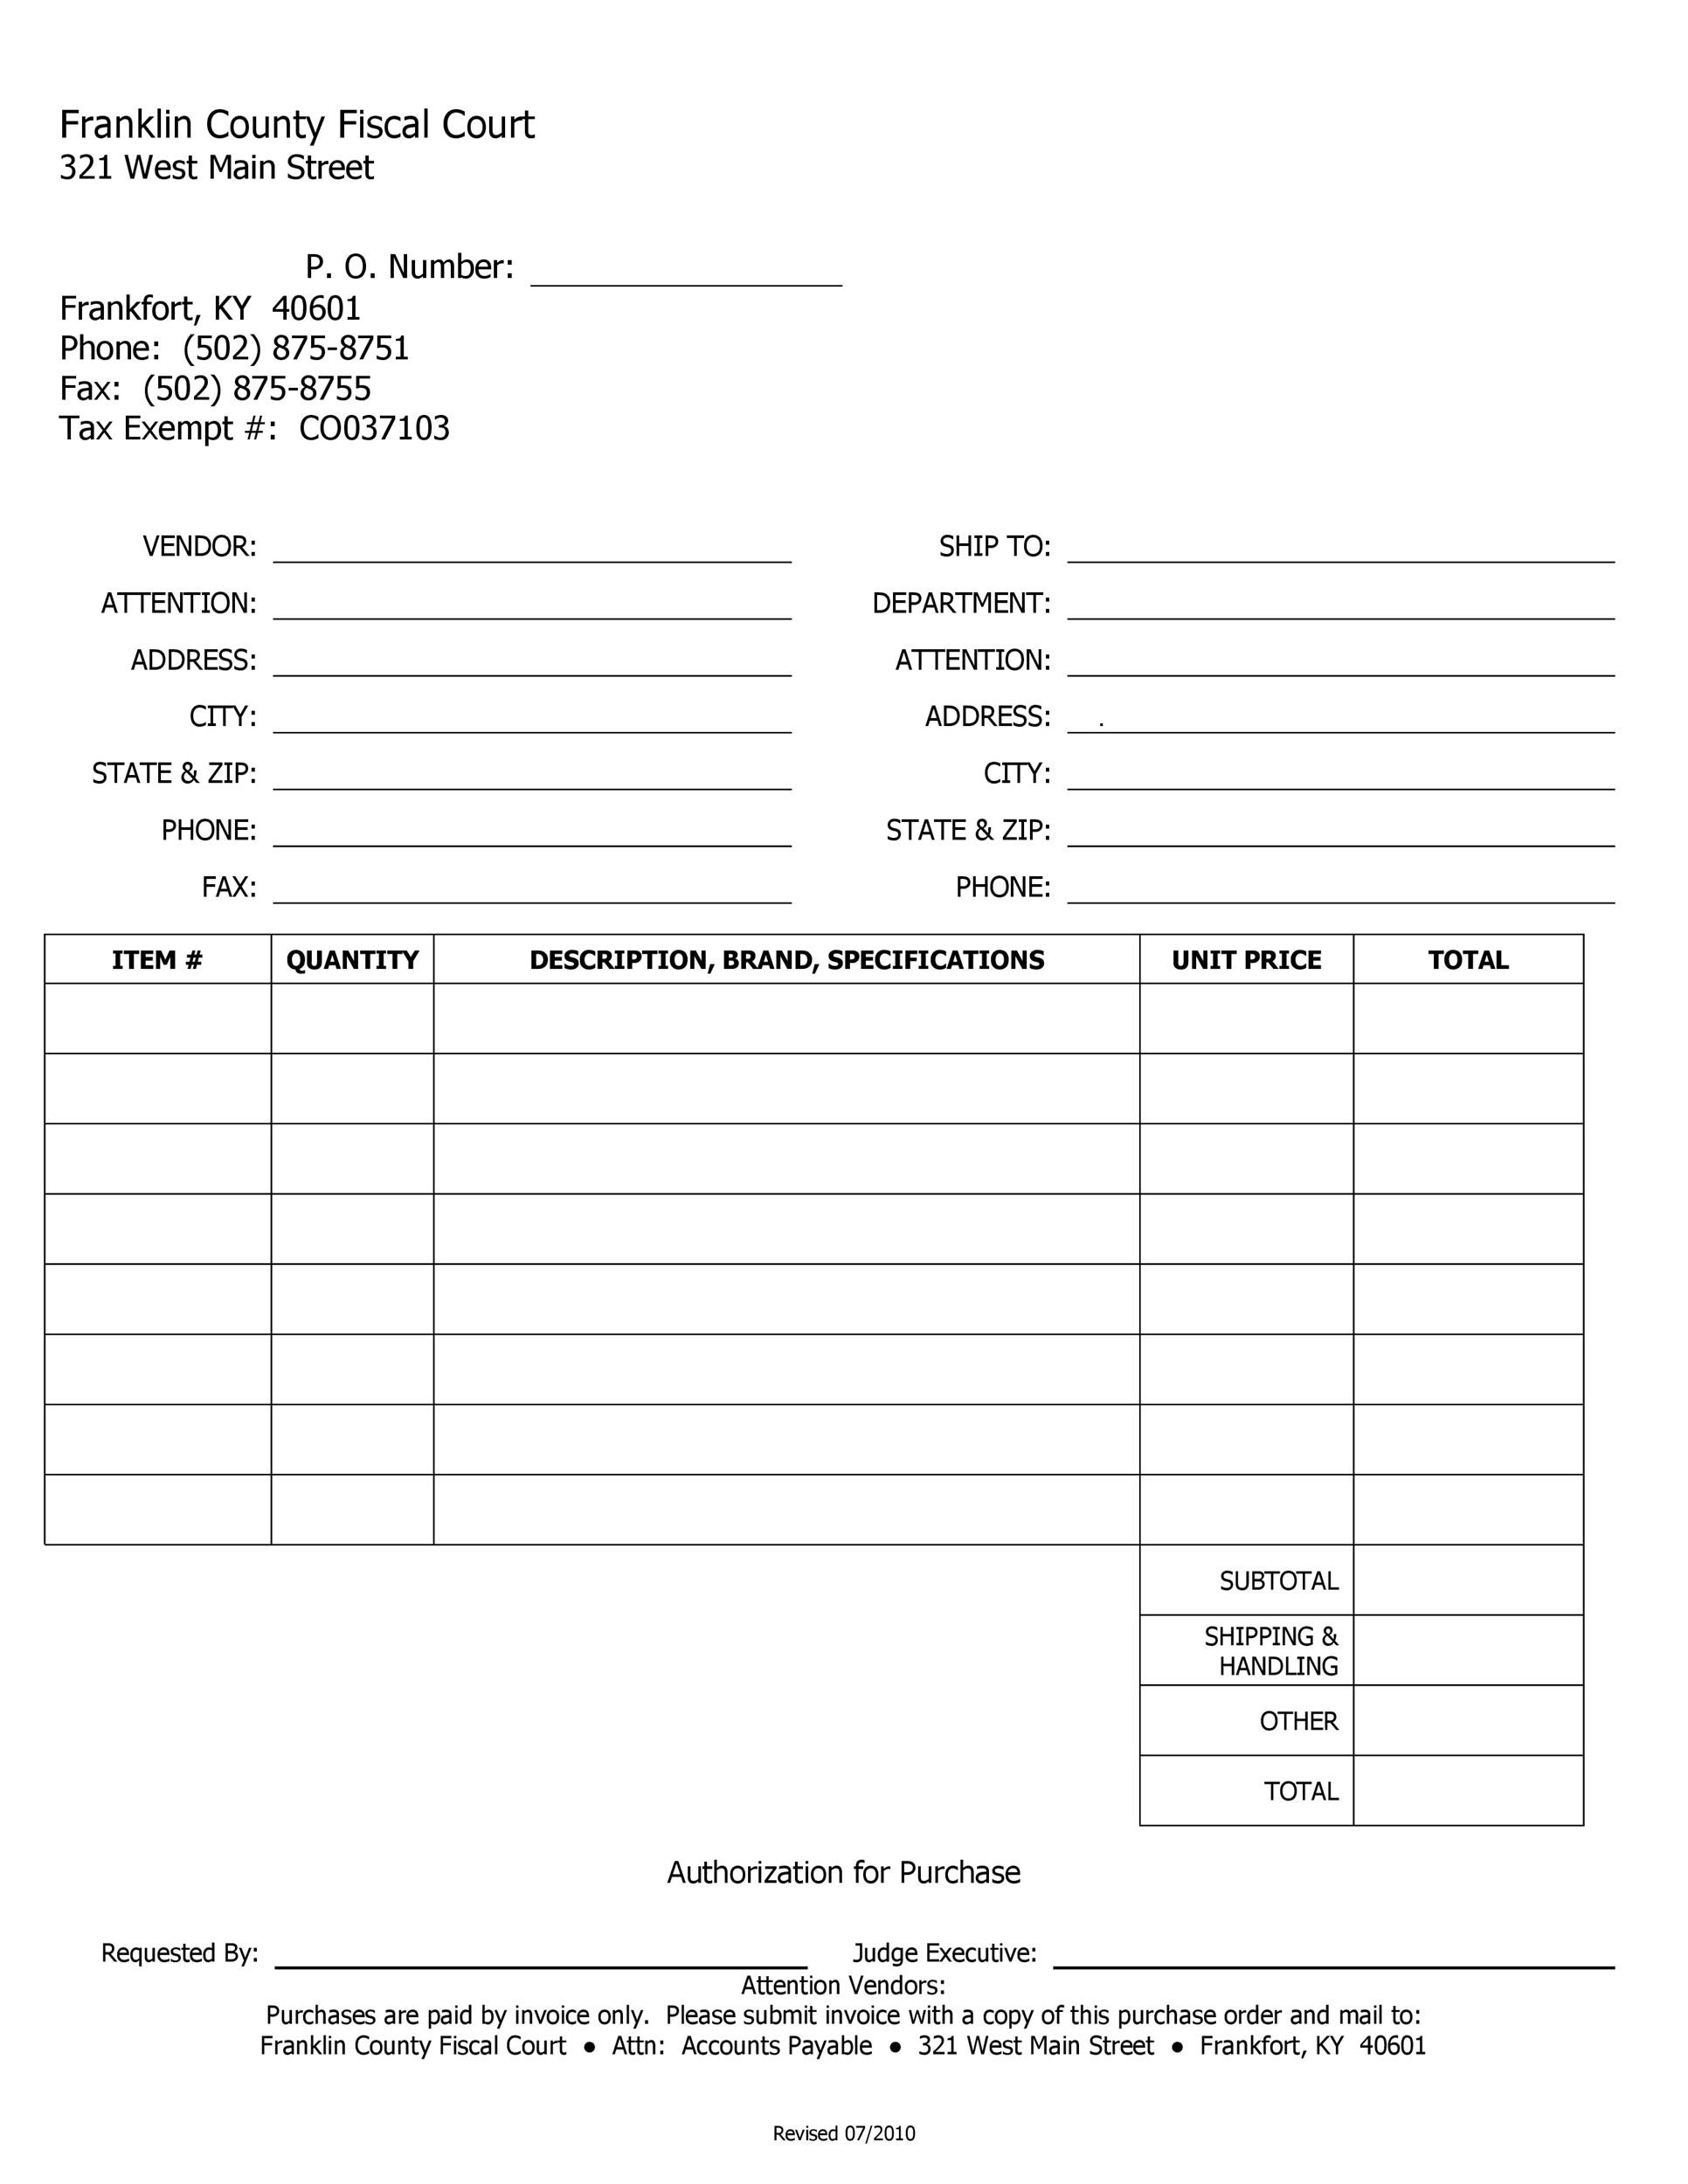 purchasing-order-form-doctemplates-10-purchase-format-in-excel-sample